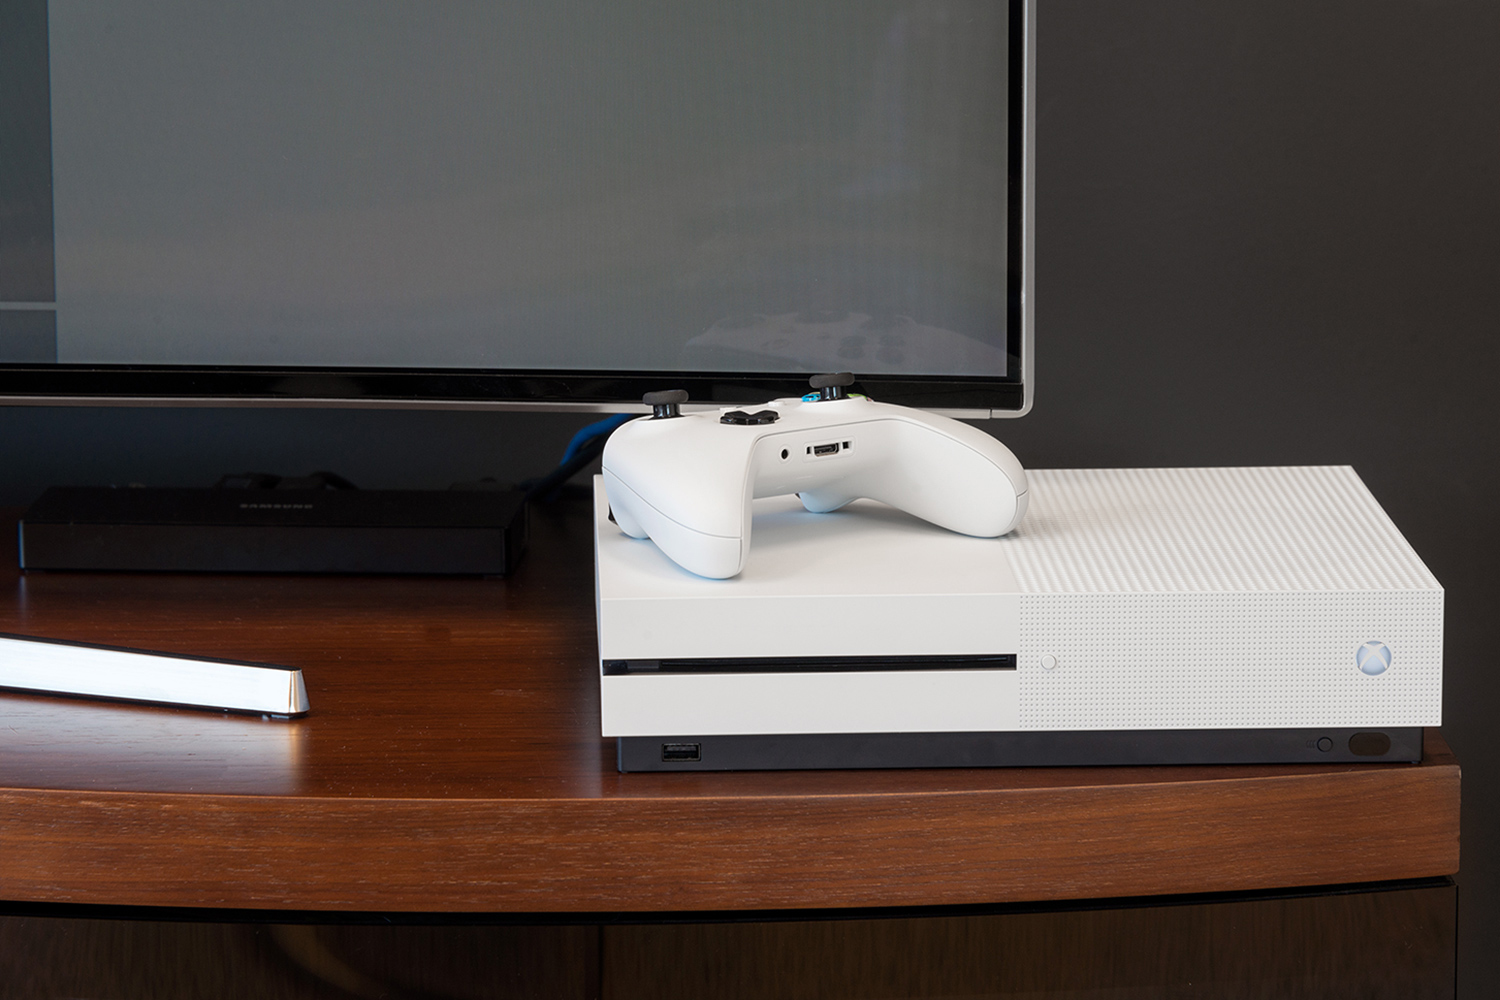 uitzending inleveren Arctic How to Watch Blu-rays on the Xbox One S and Xbox One X | Digital Trends